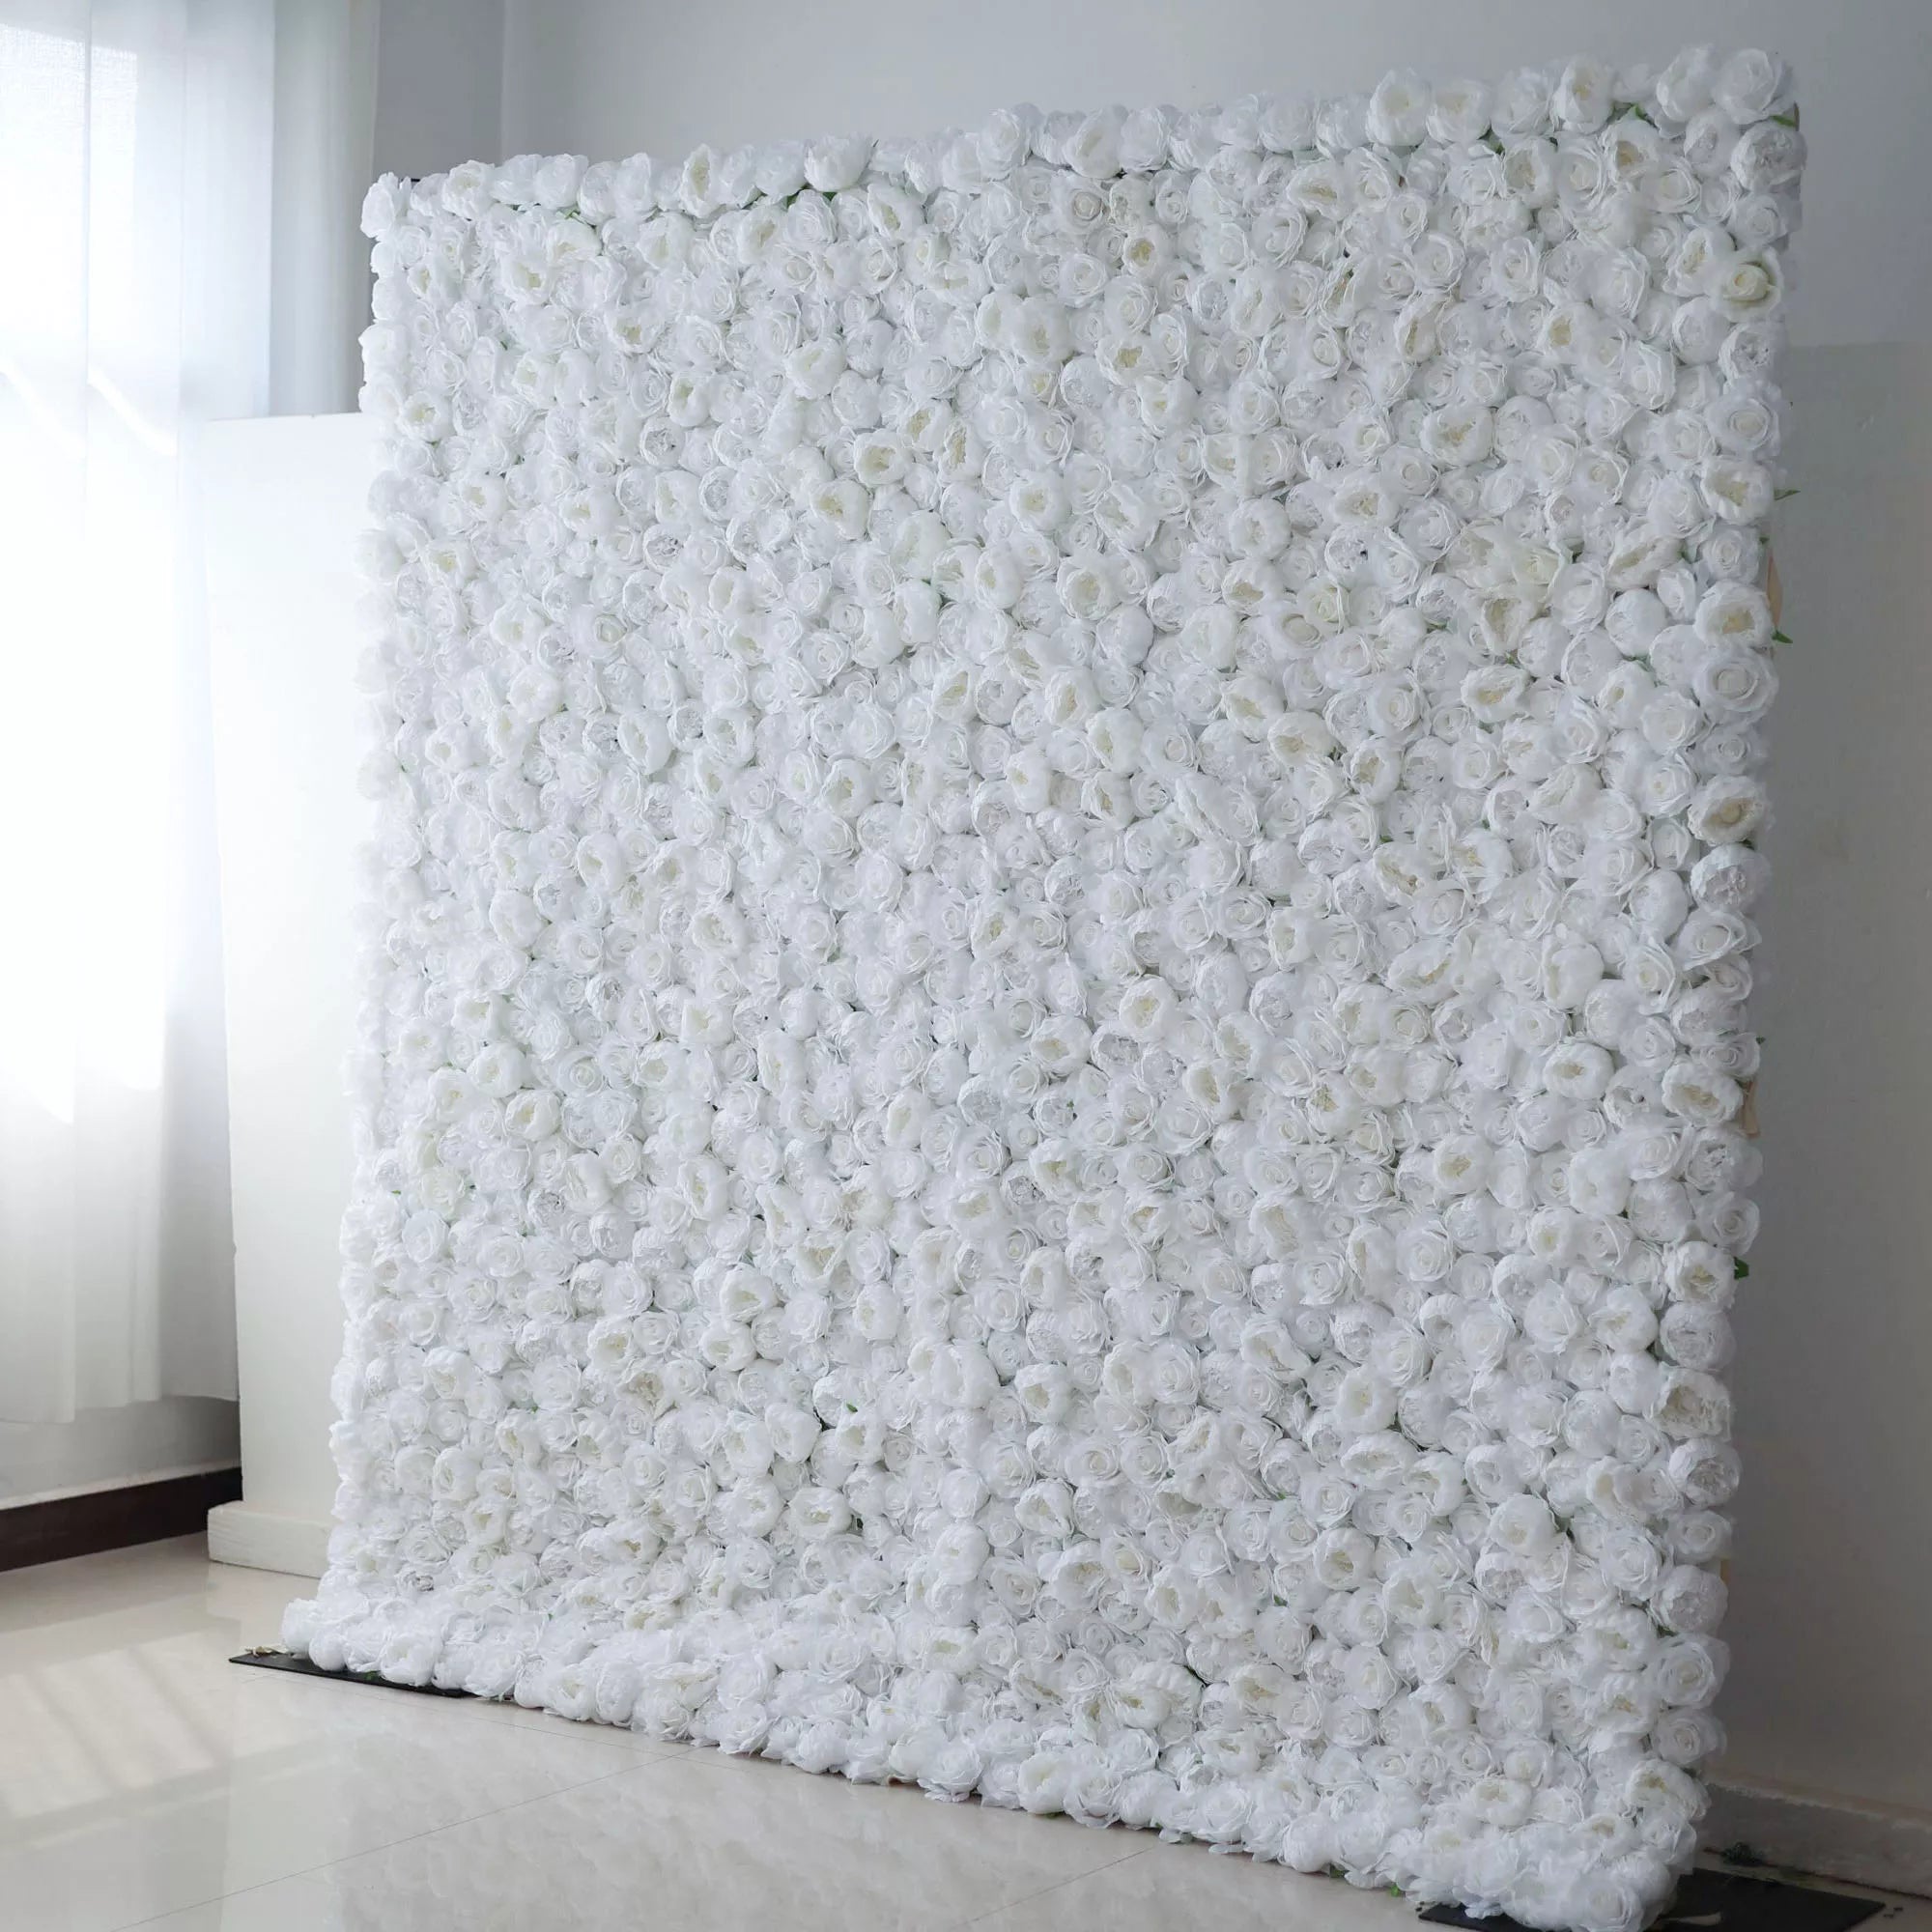 Valar Flowers' Artificial Fabric Flower Wall: White Blossom Bliss. A sea of densely packed white roses, projecting sophistication, timeless beauty, and pure romance, ideal for events cherishing elegance and captivating allure.